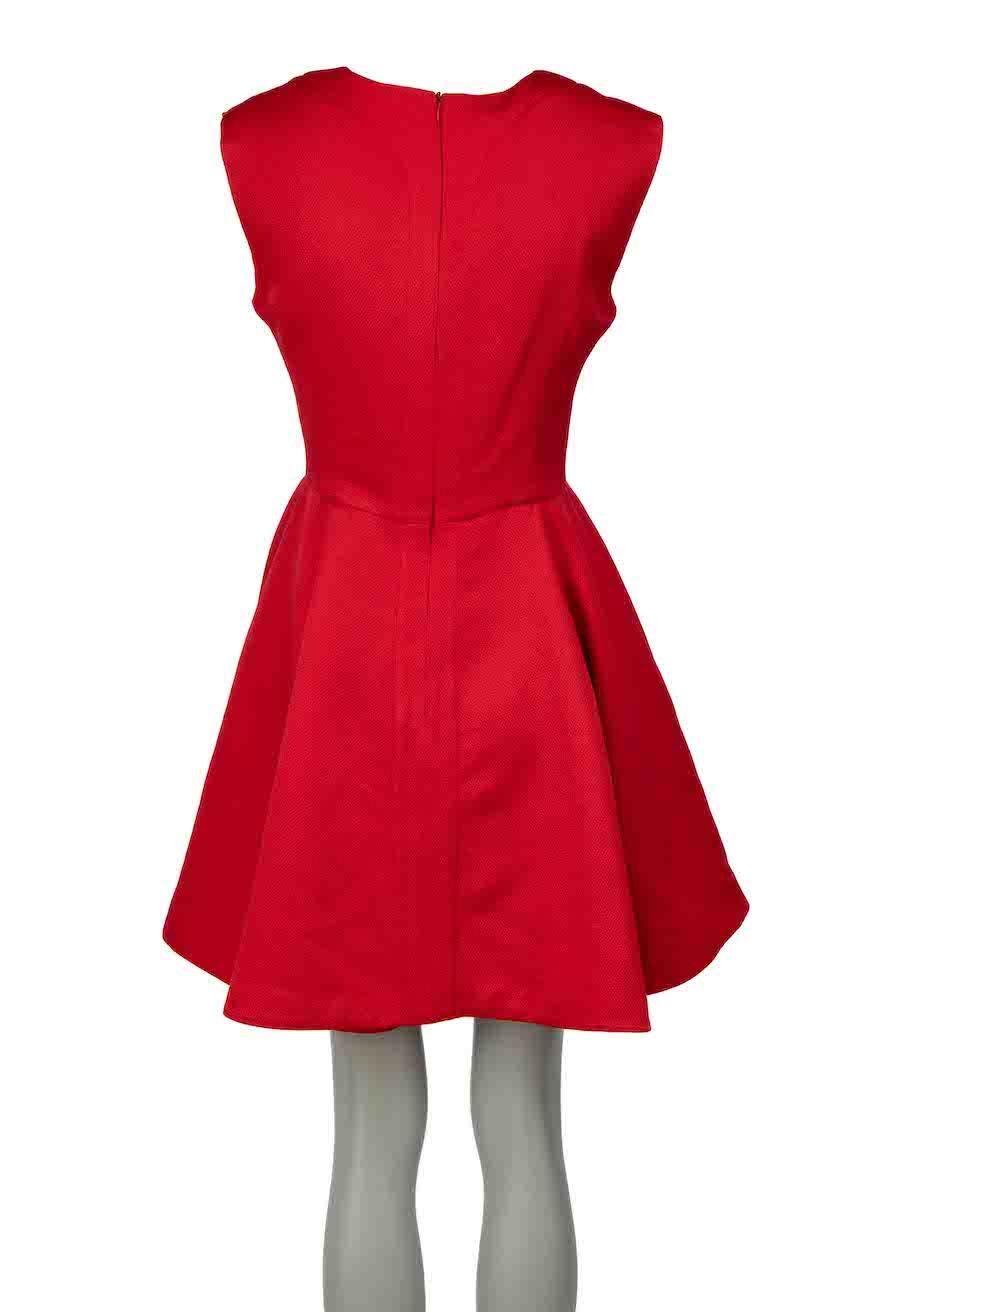 Emilia Wickstead Red Textured Mini Dress Size M In Excellent Condition For Sale In London, GB